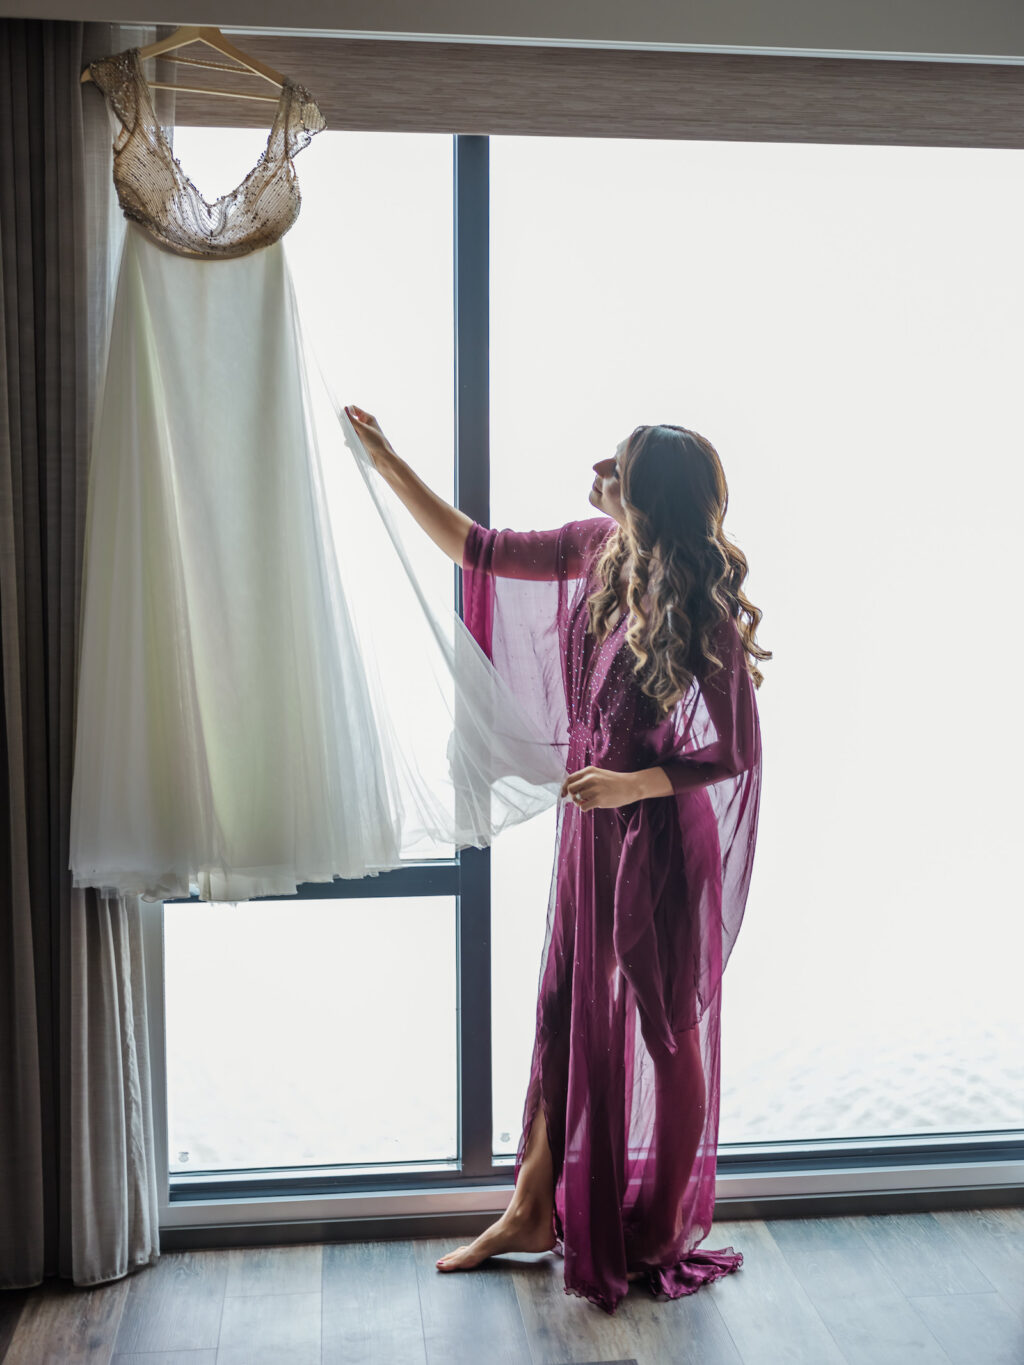 Tampa Bride Looking at Alon Livne Michelle Wedding Dress Getting Wedding Ready in Flowy Purple and Silver Polka Dot Robe